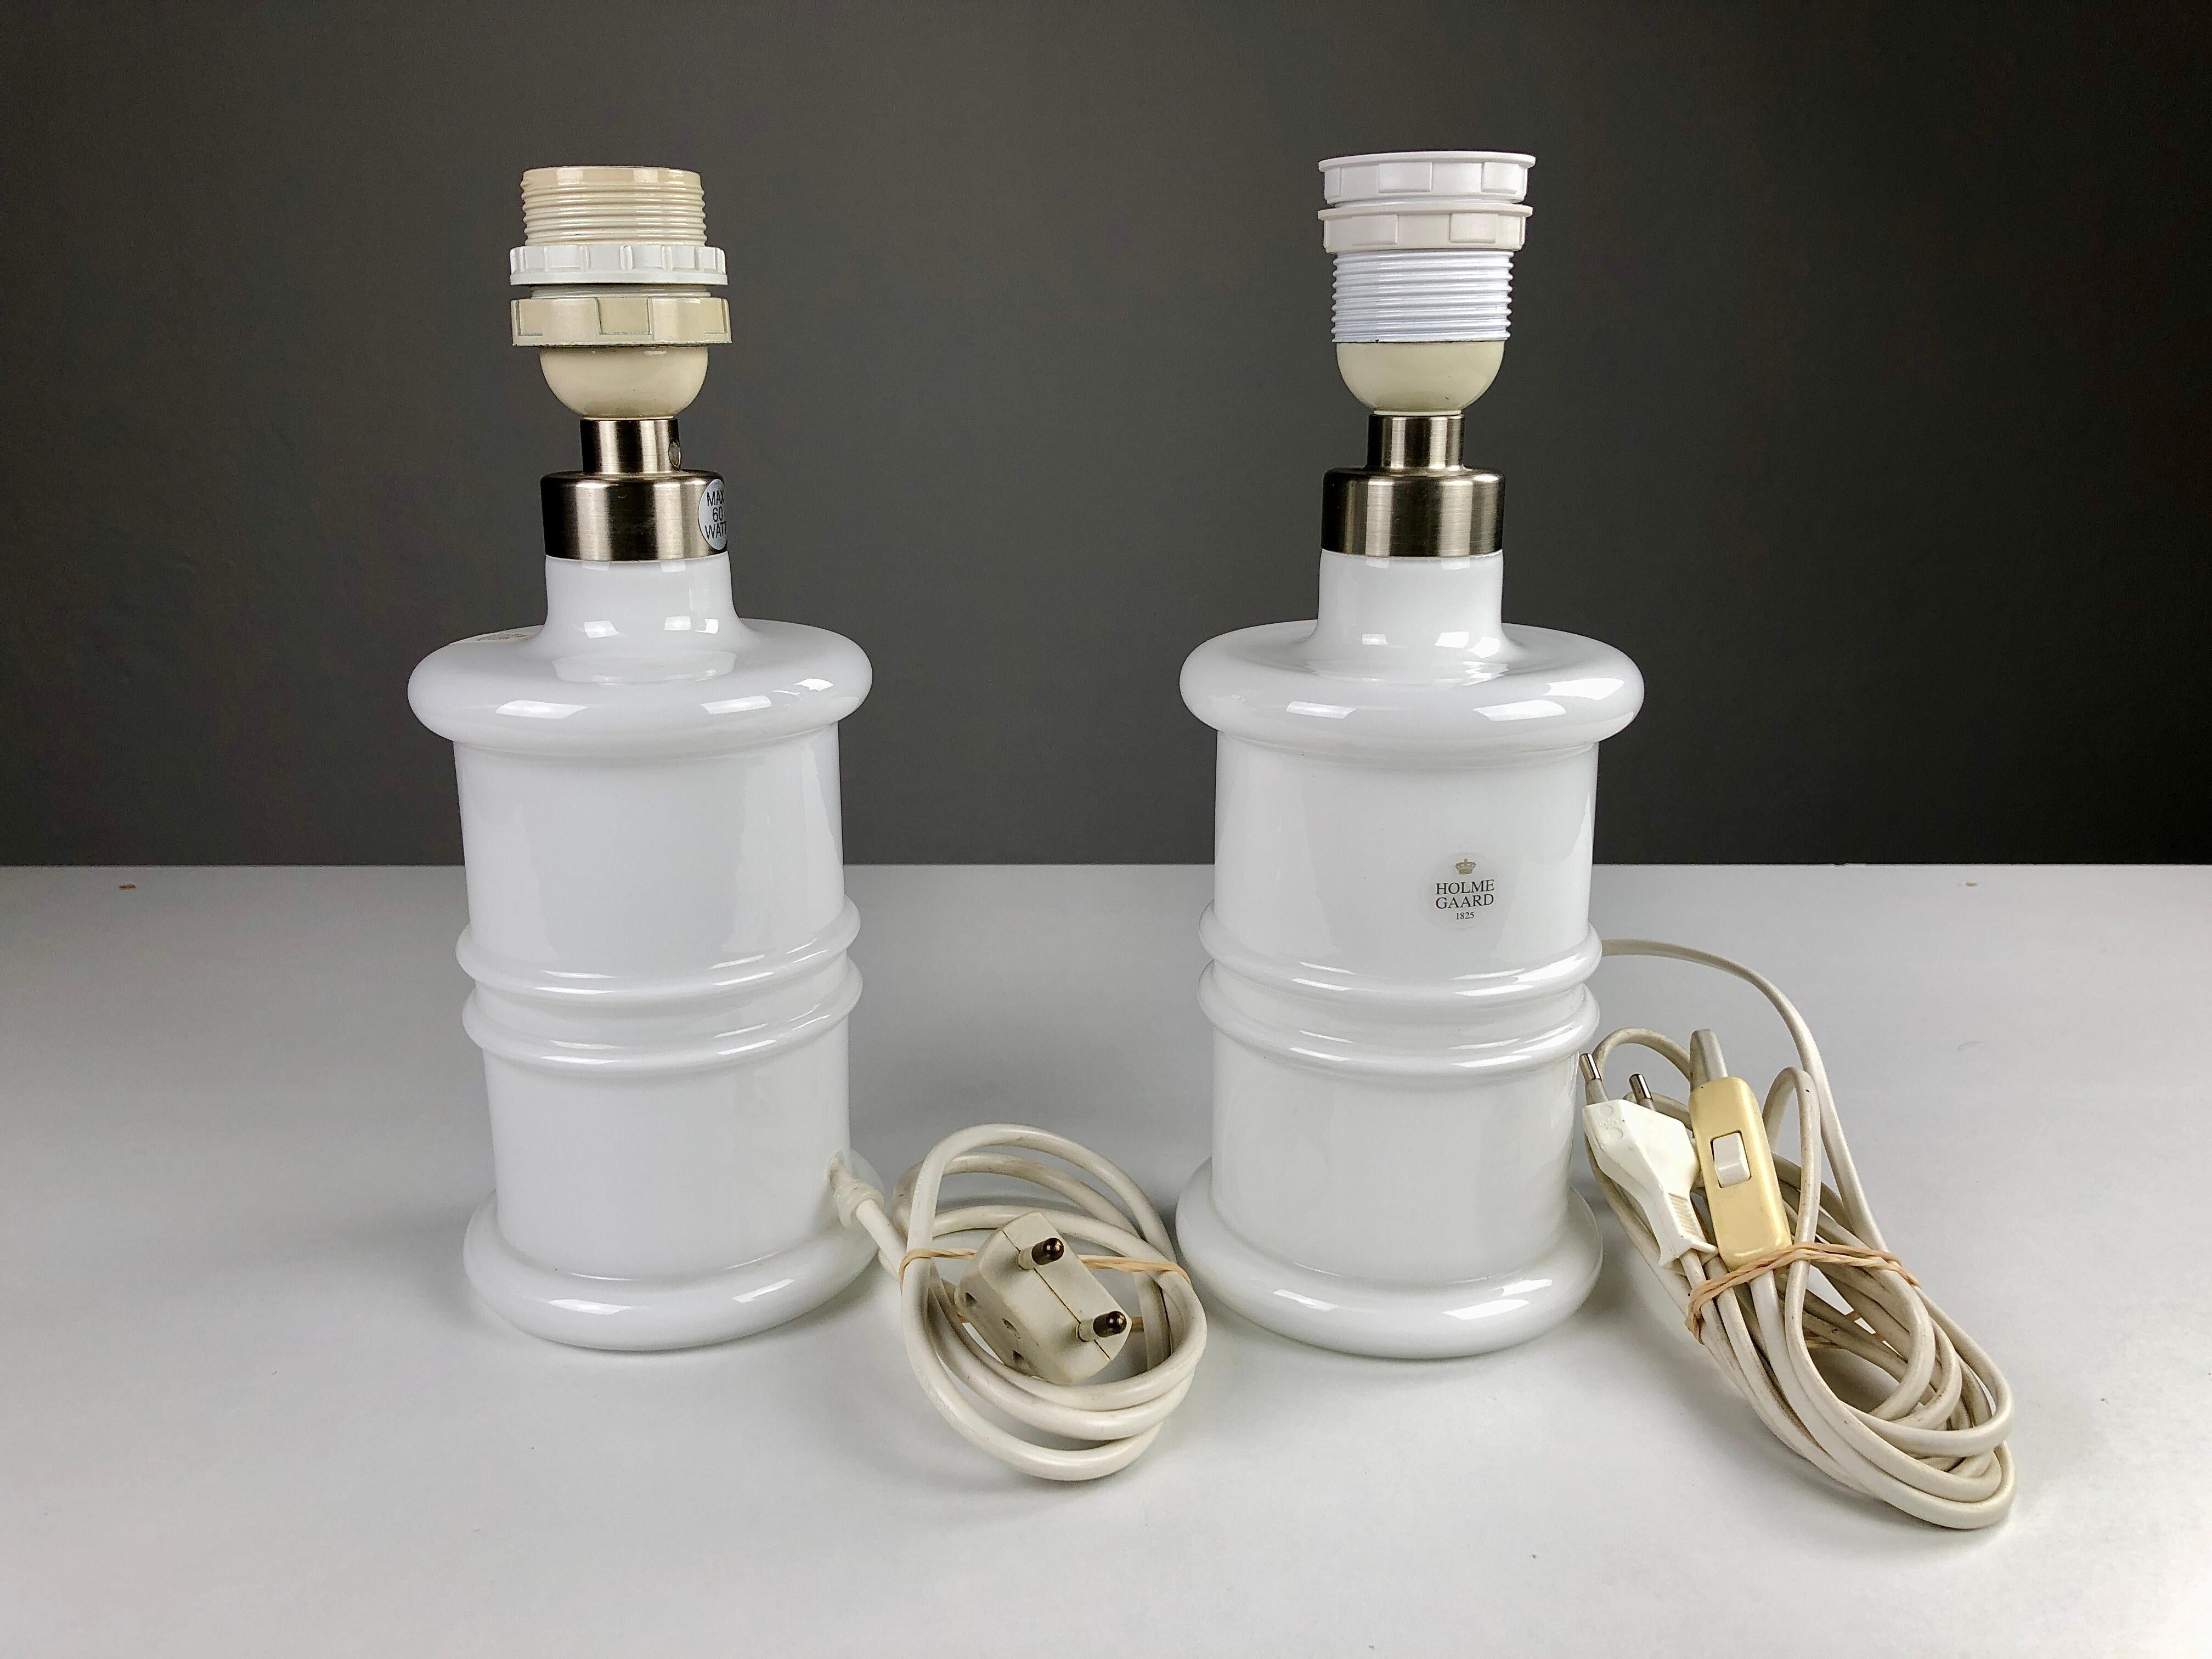 1980's Sidse Werner Danish handblown glass pharmacist table Lamps by Holmegaard

The adjustable table lamps in white opaline glass were designed in by Sidse Werner for Holmegaard Glass in 1981 and are in very good condition.

Height of the